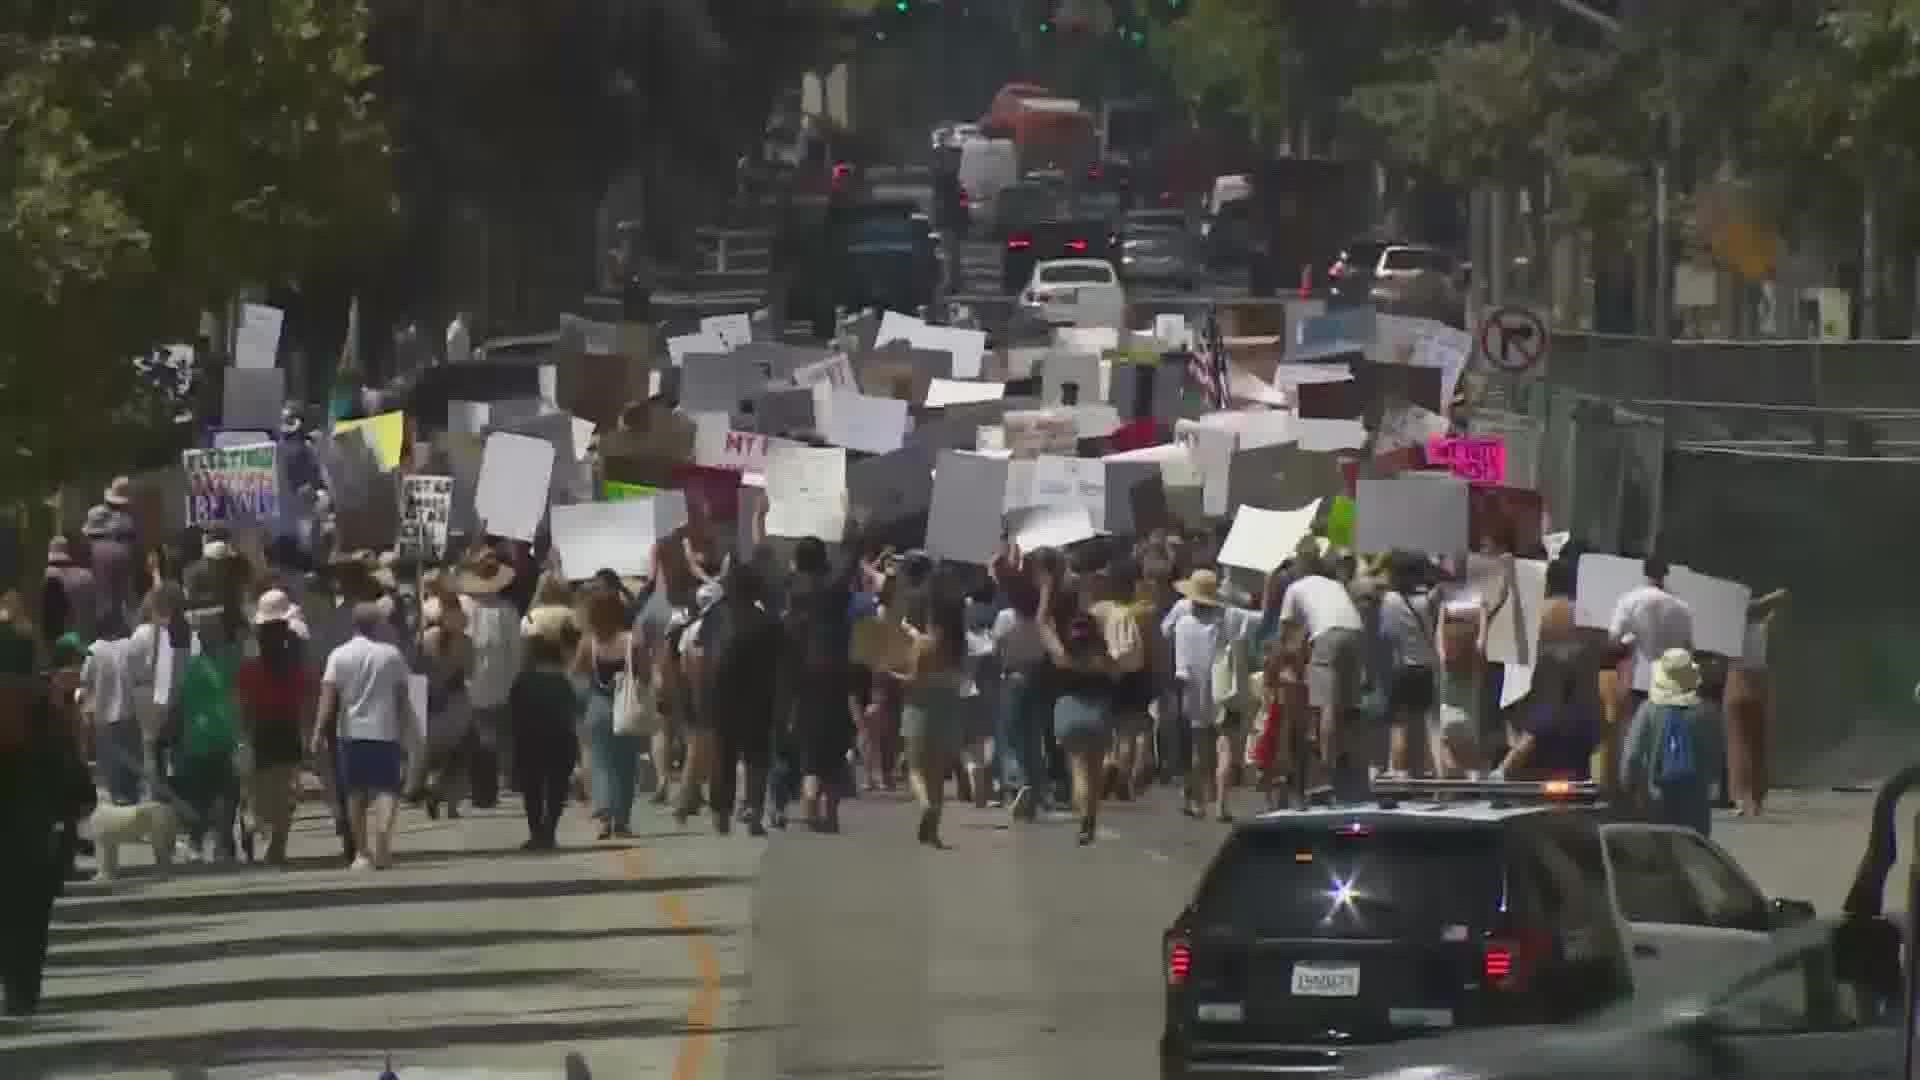 Protests continued across the country on Sunday.